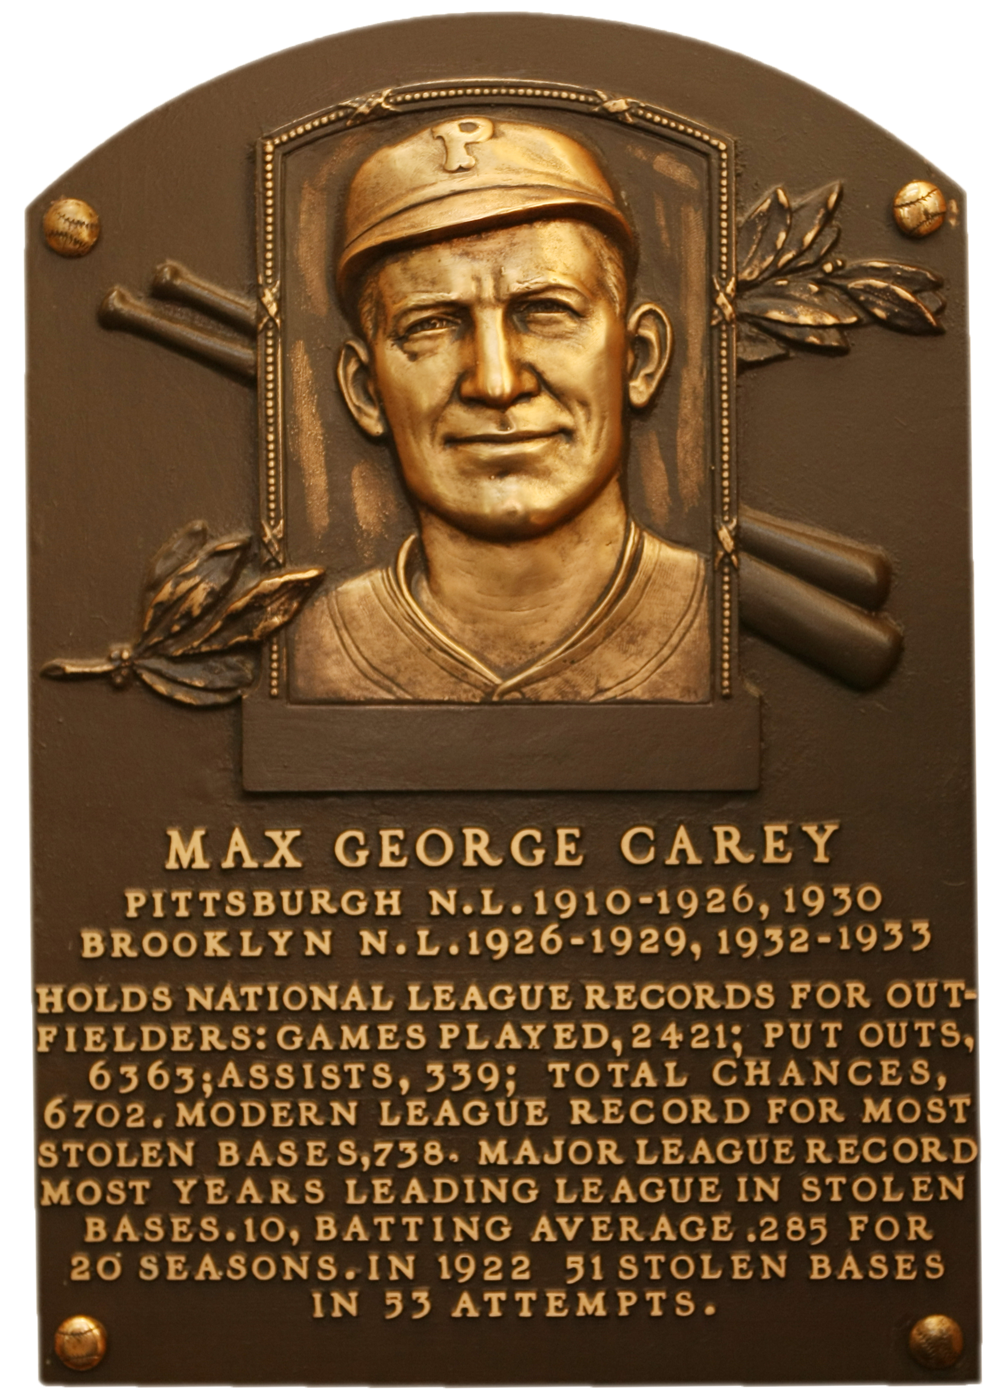 Max Carey Hall of Fame plaque